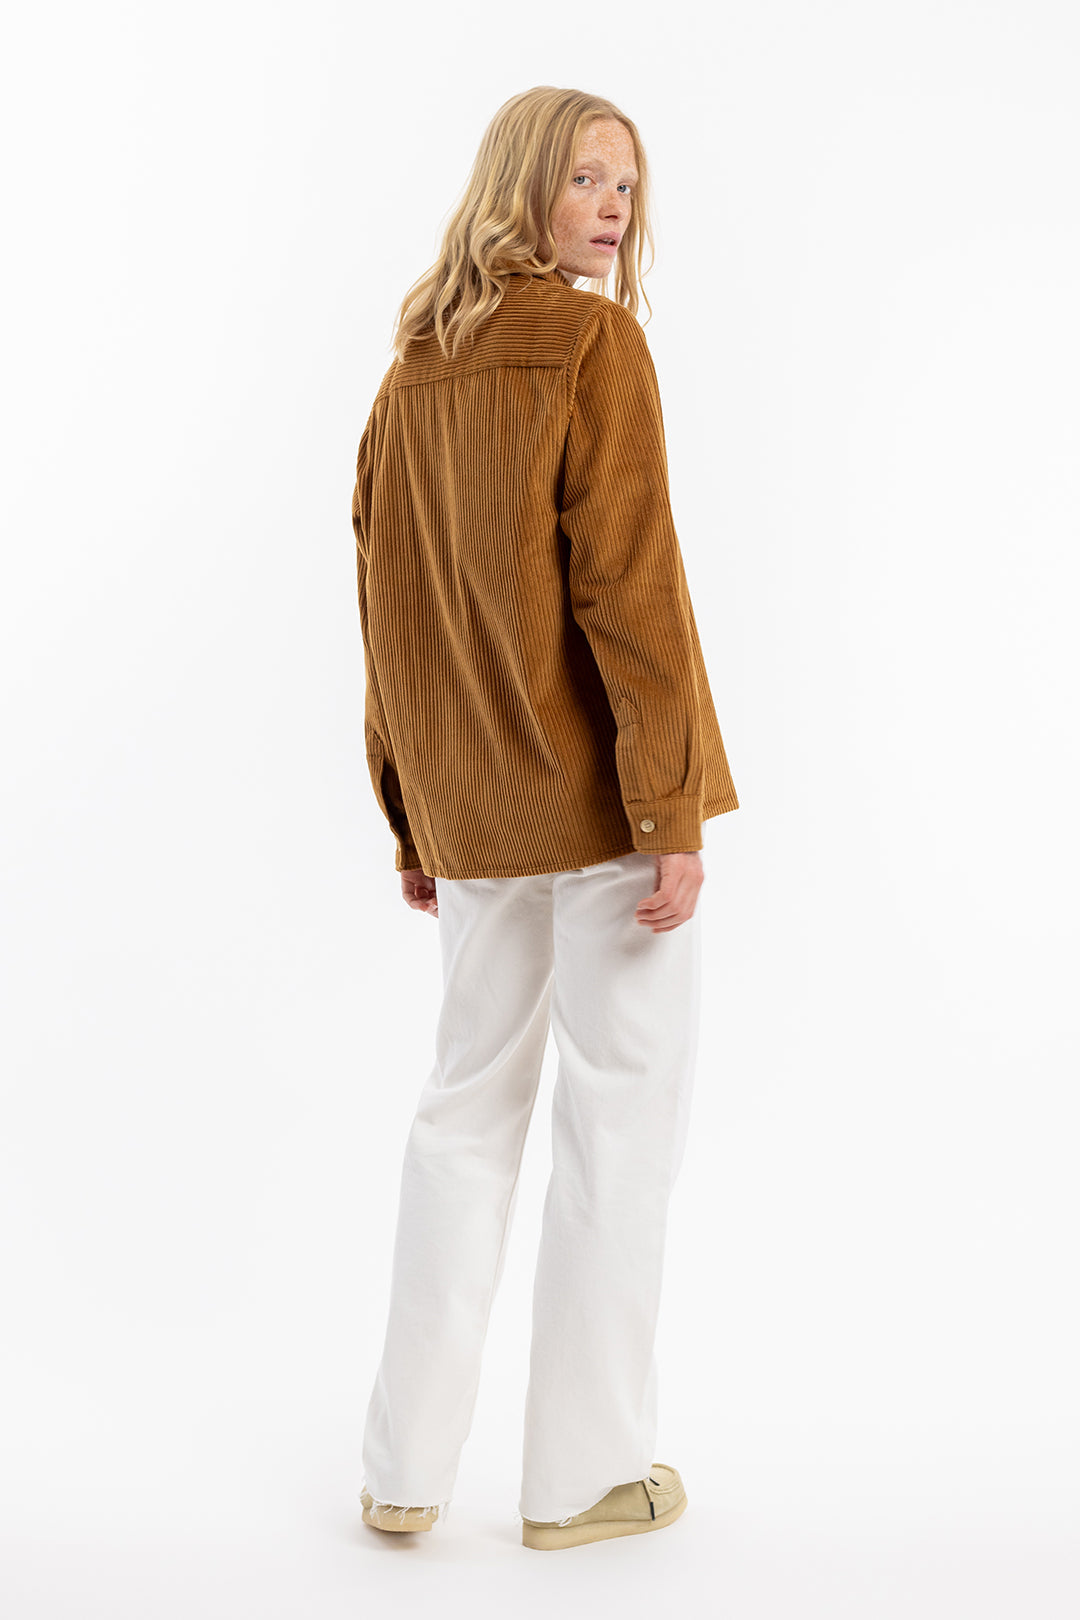 Brown corduroy shirt made from 100% organic cotton from Rotholz